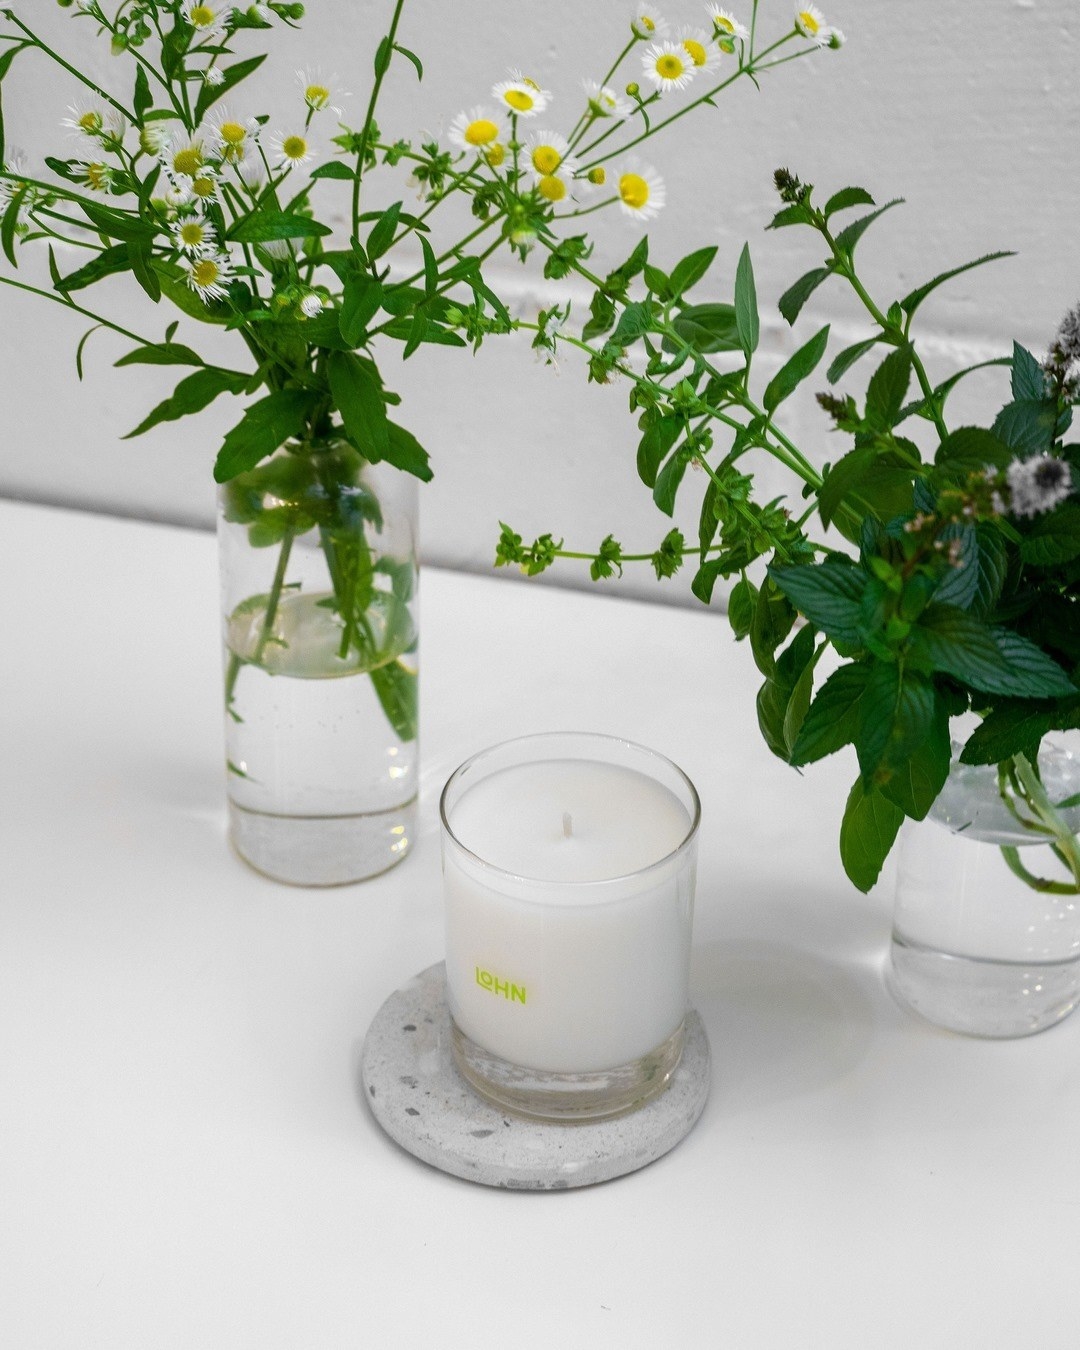 A scented candle next to a vase full of various herbs